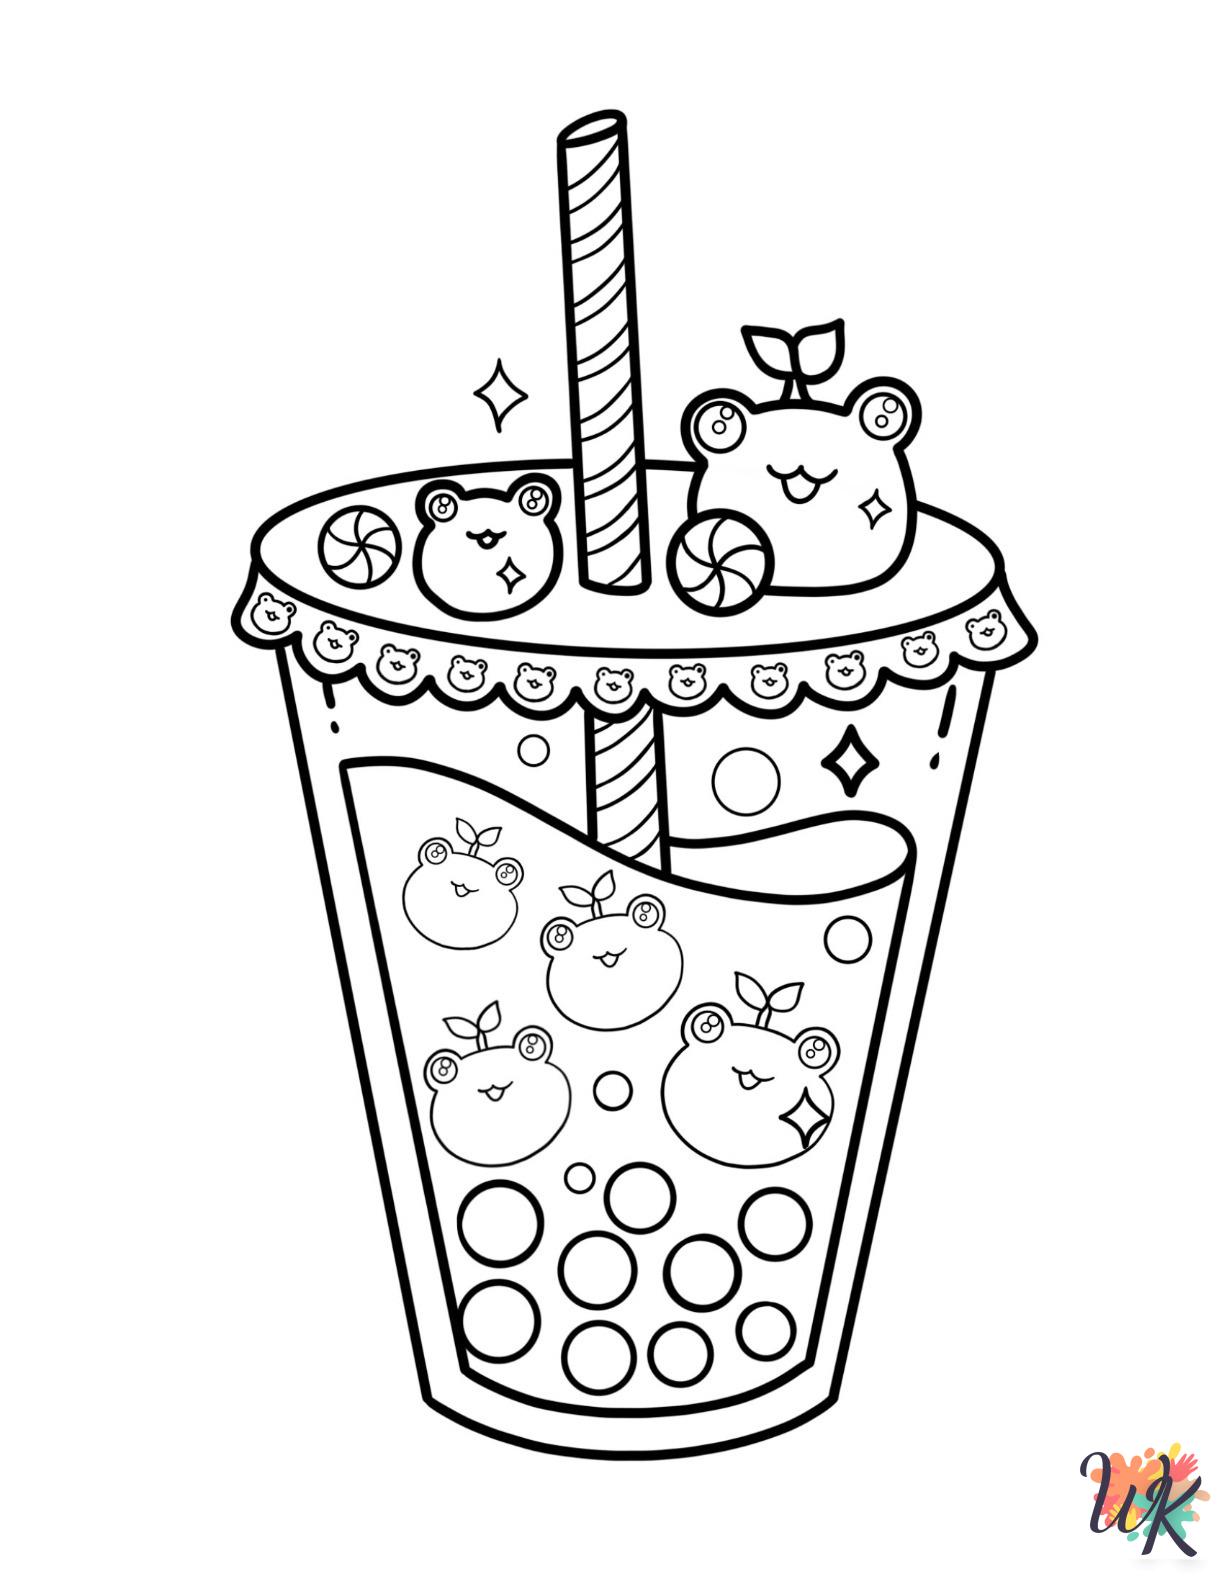 Boba Tea coloring pages printable free